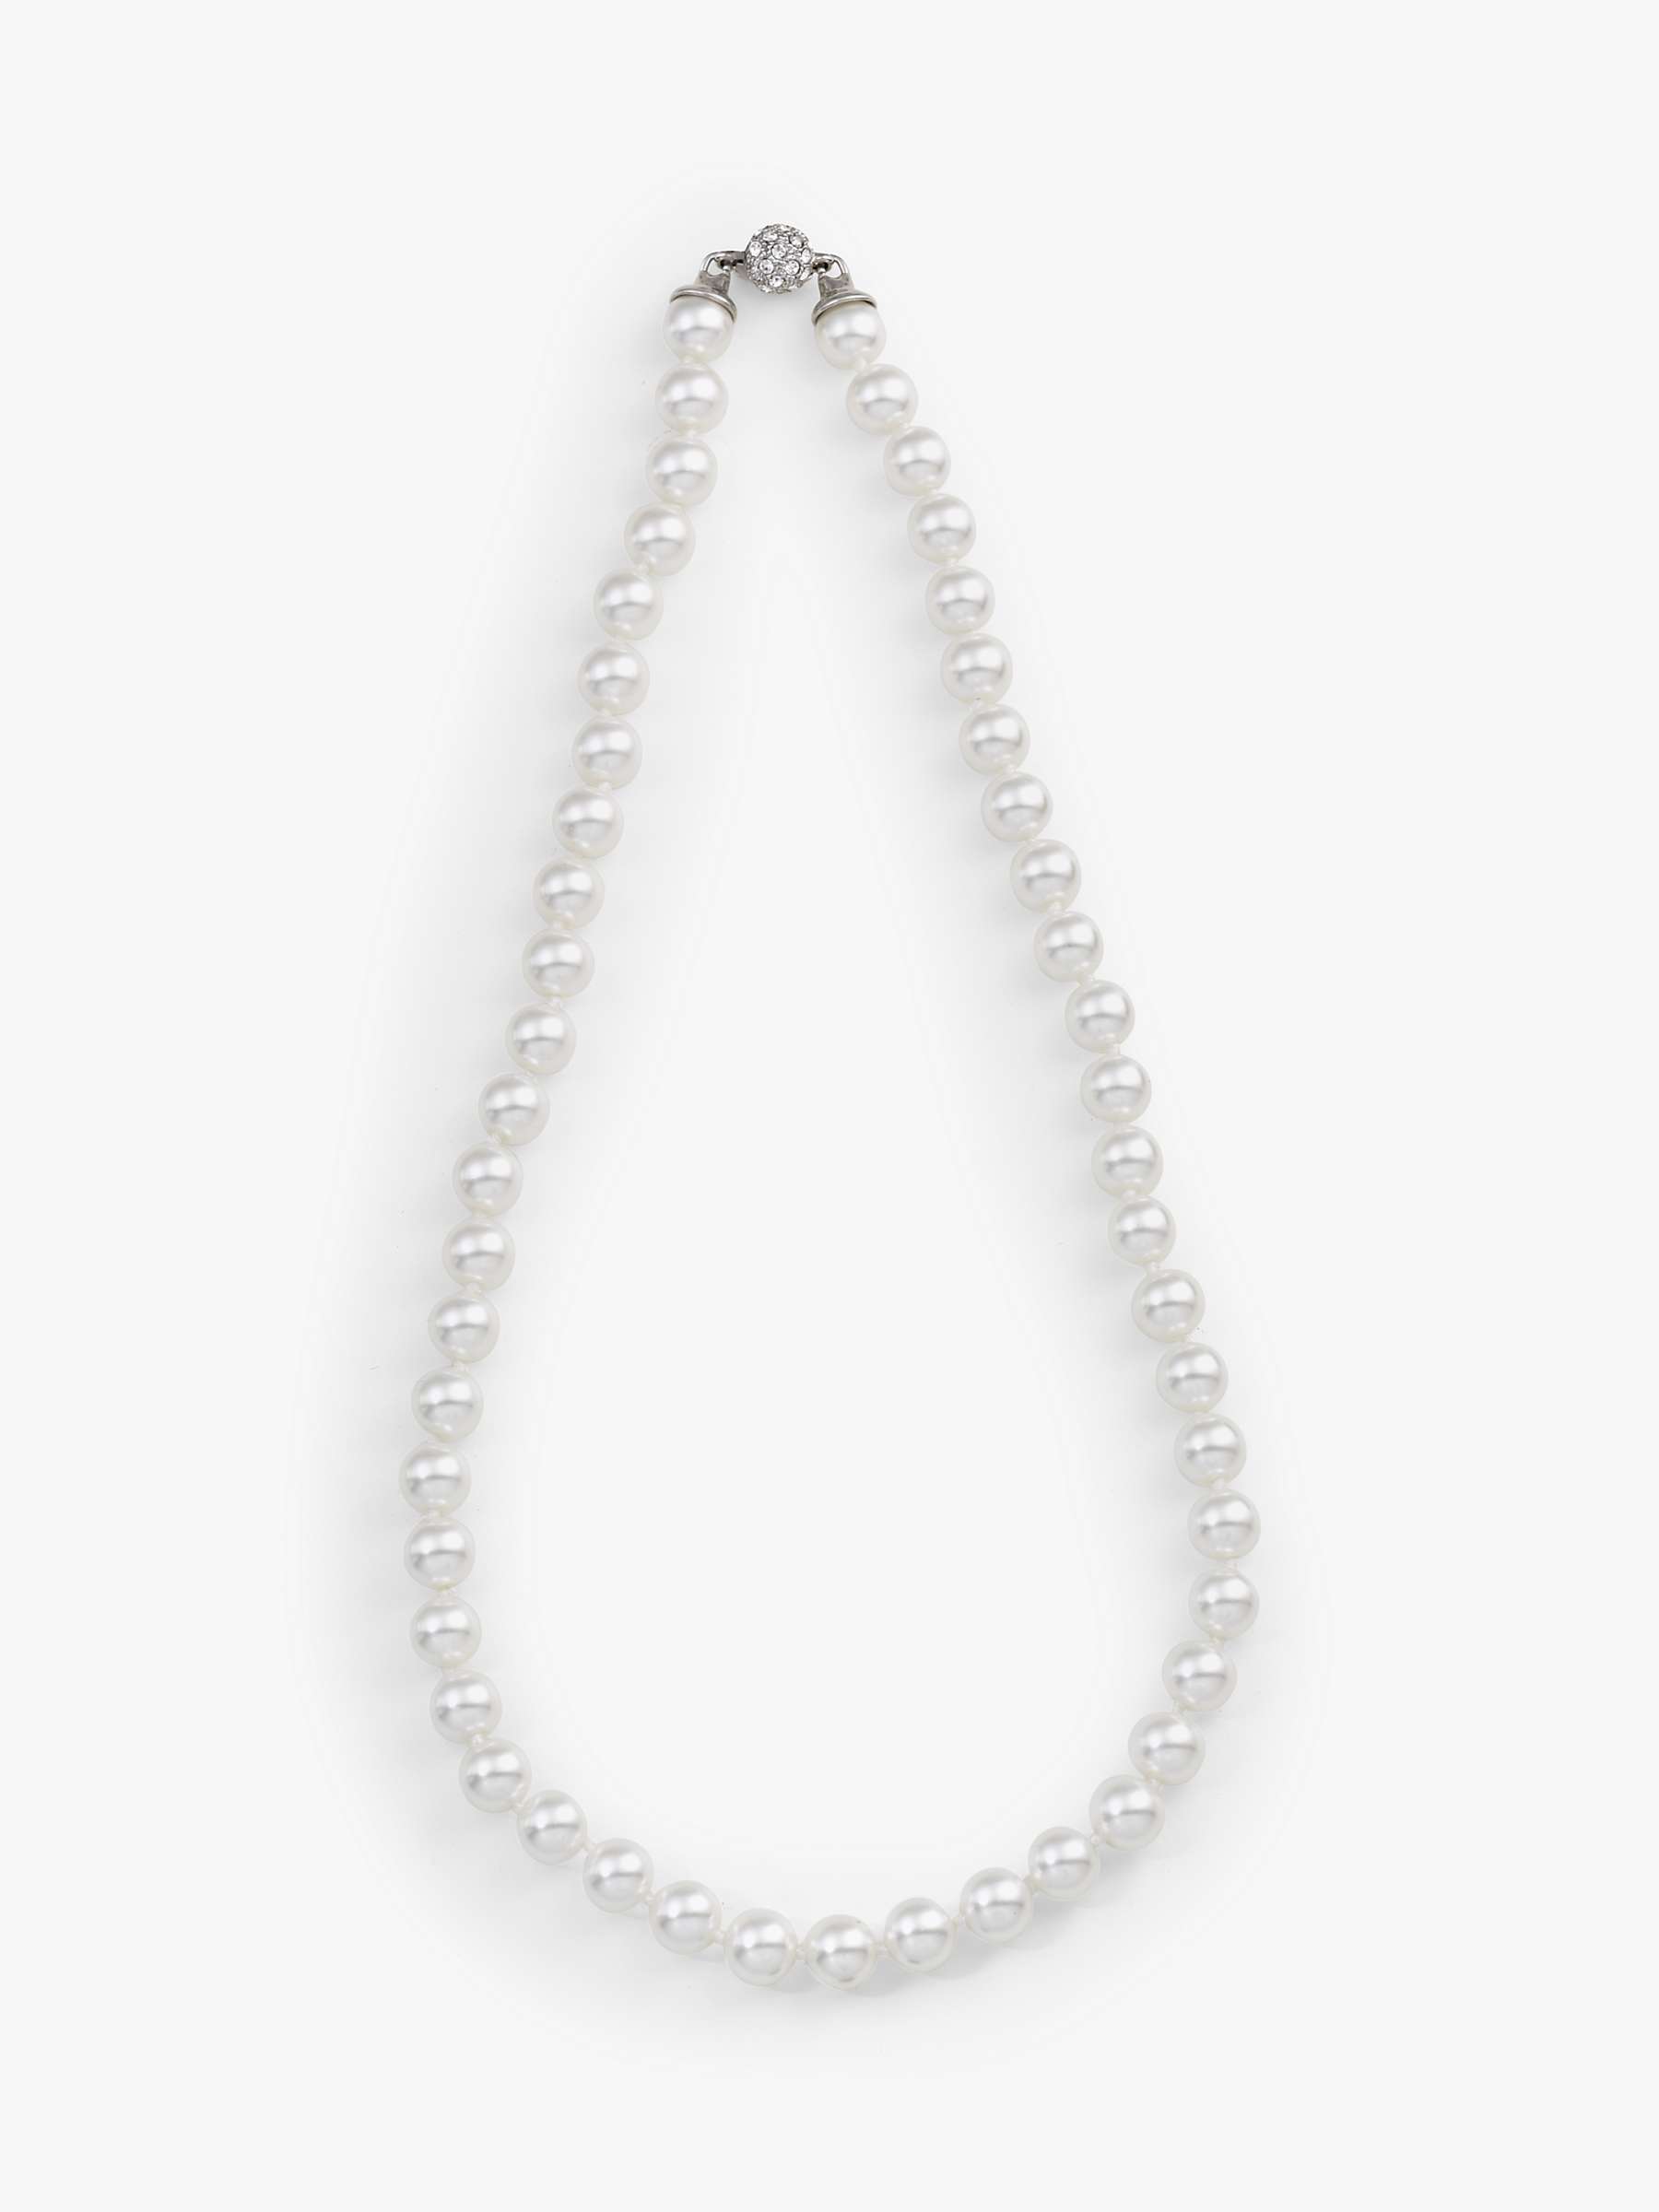 Buy Eclectica Vintage Faux Pearl Swarovski Crystal Necklace, White Online at johnlewis.com